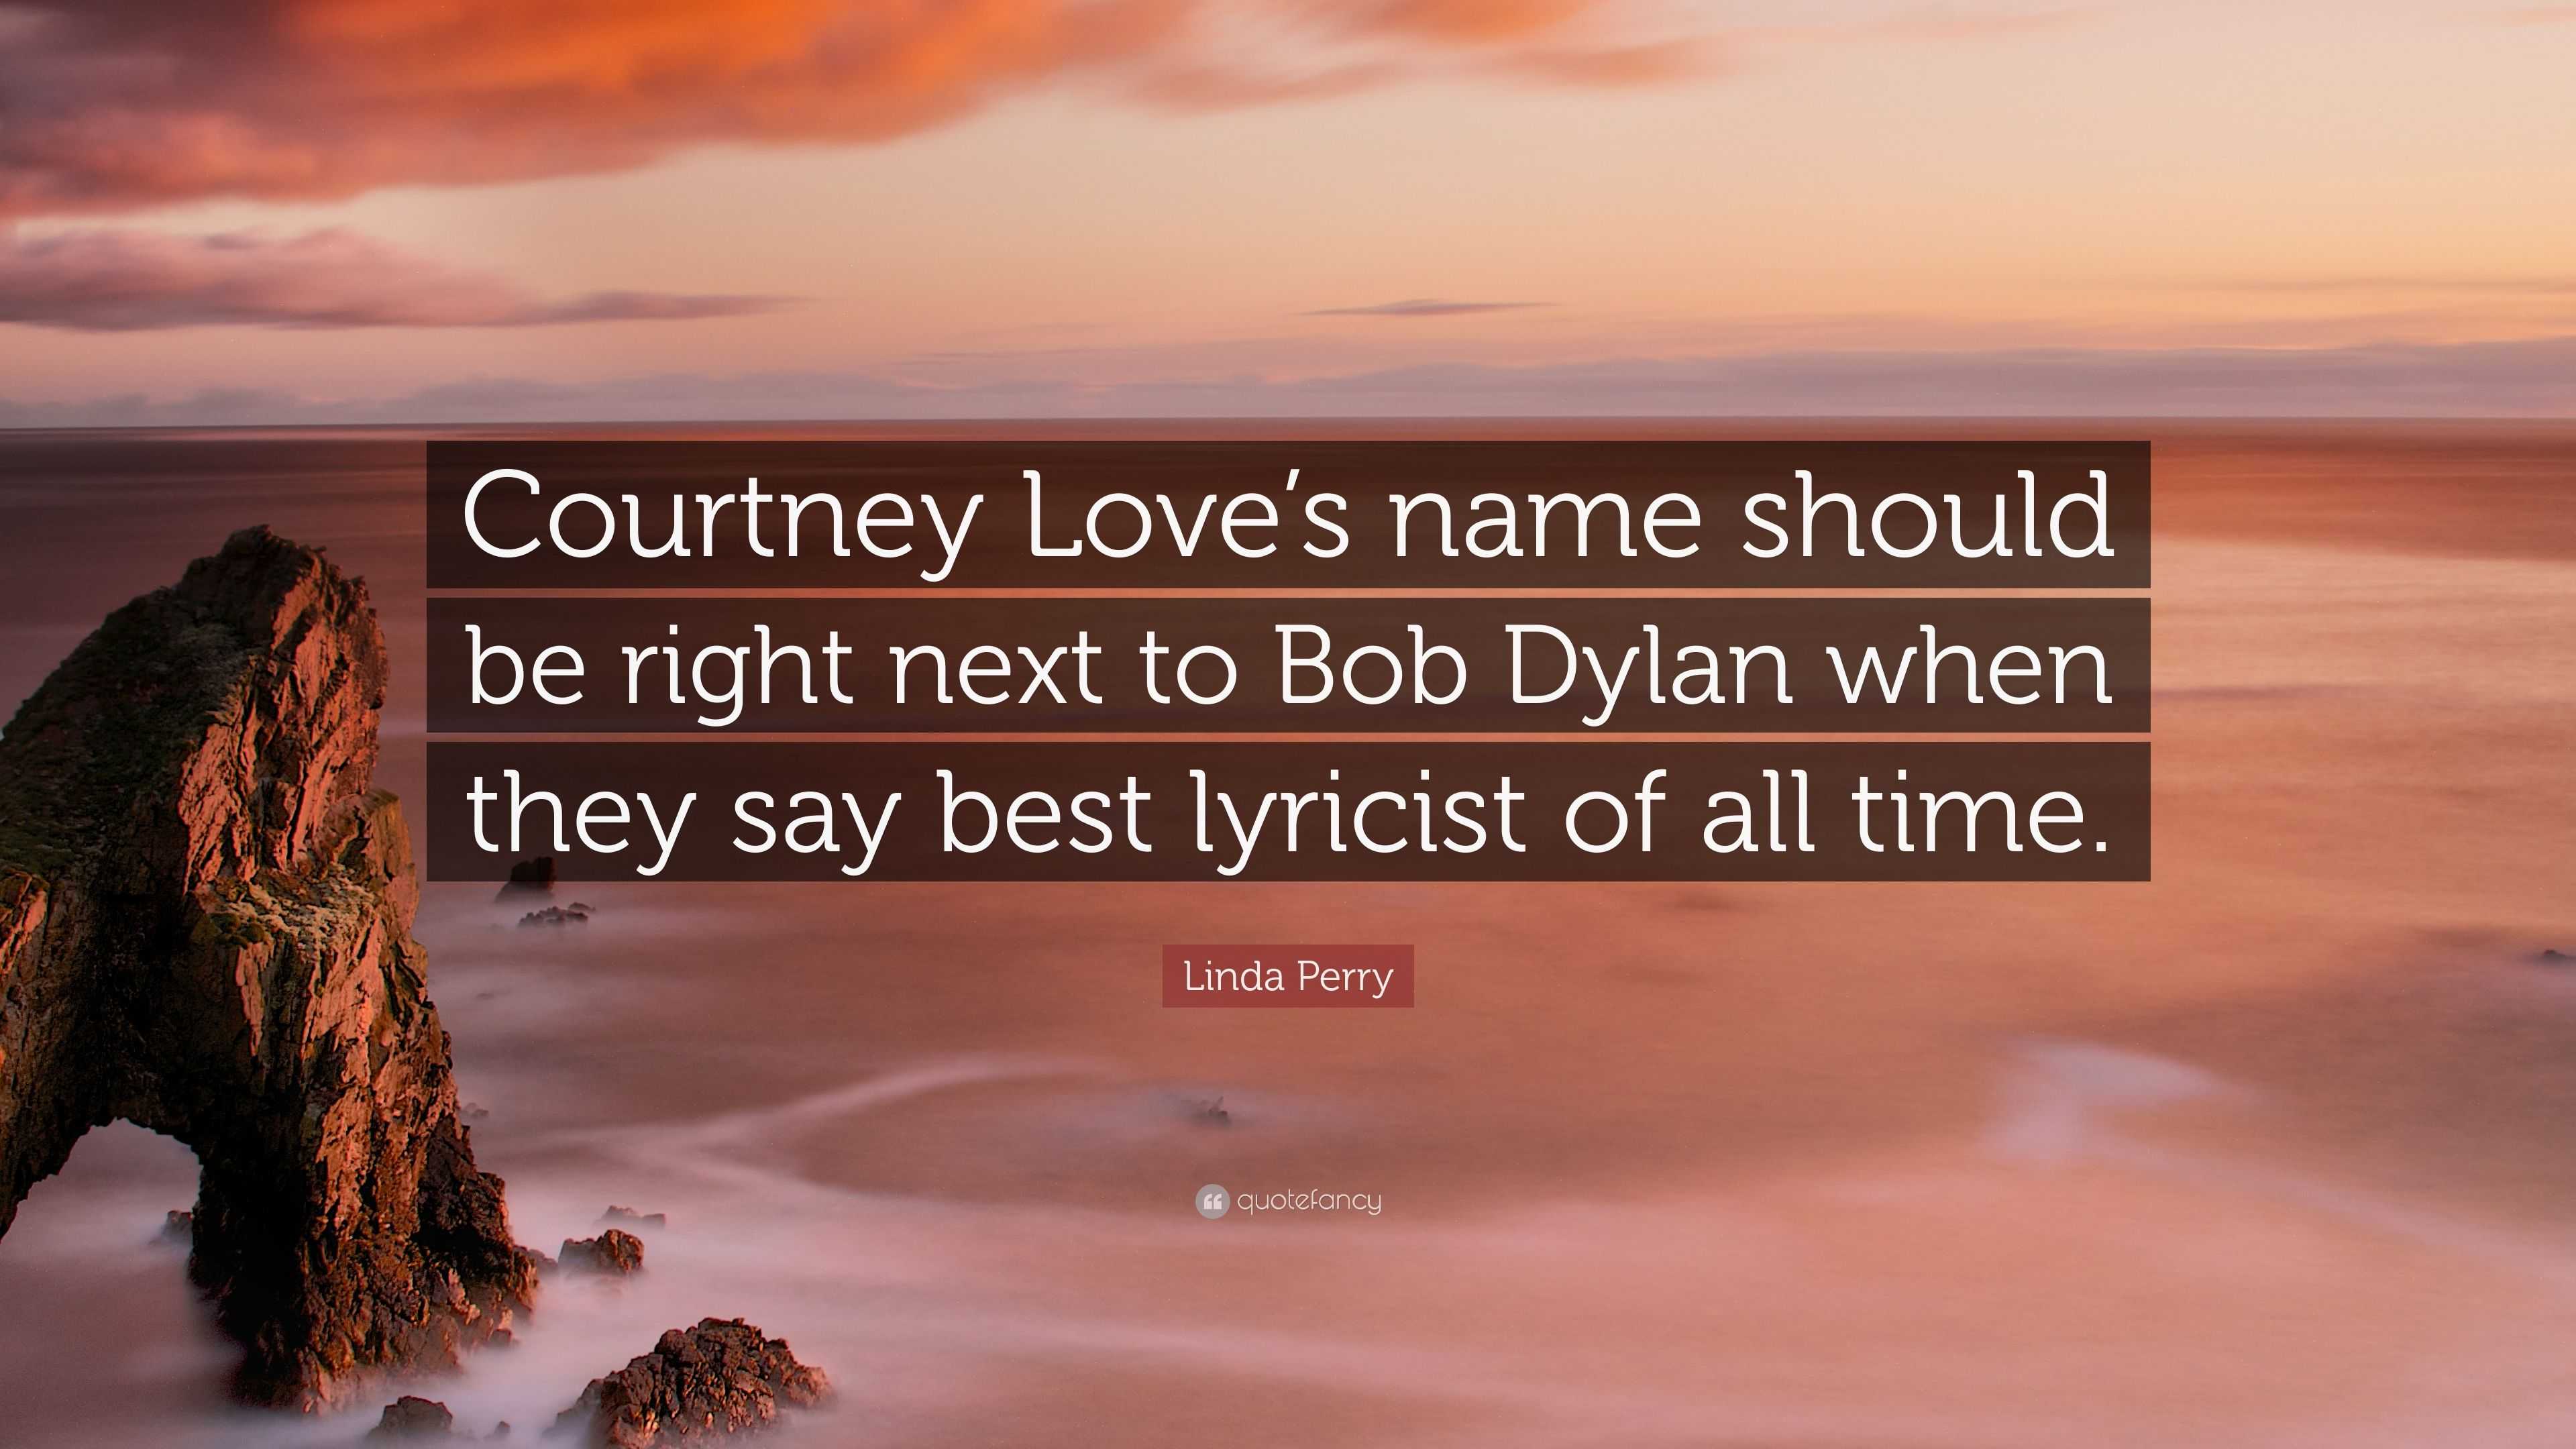 Linda Perry Quote: “Courtney Love's name should be right next to Bob Dylan  when they say